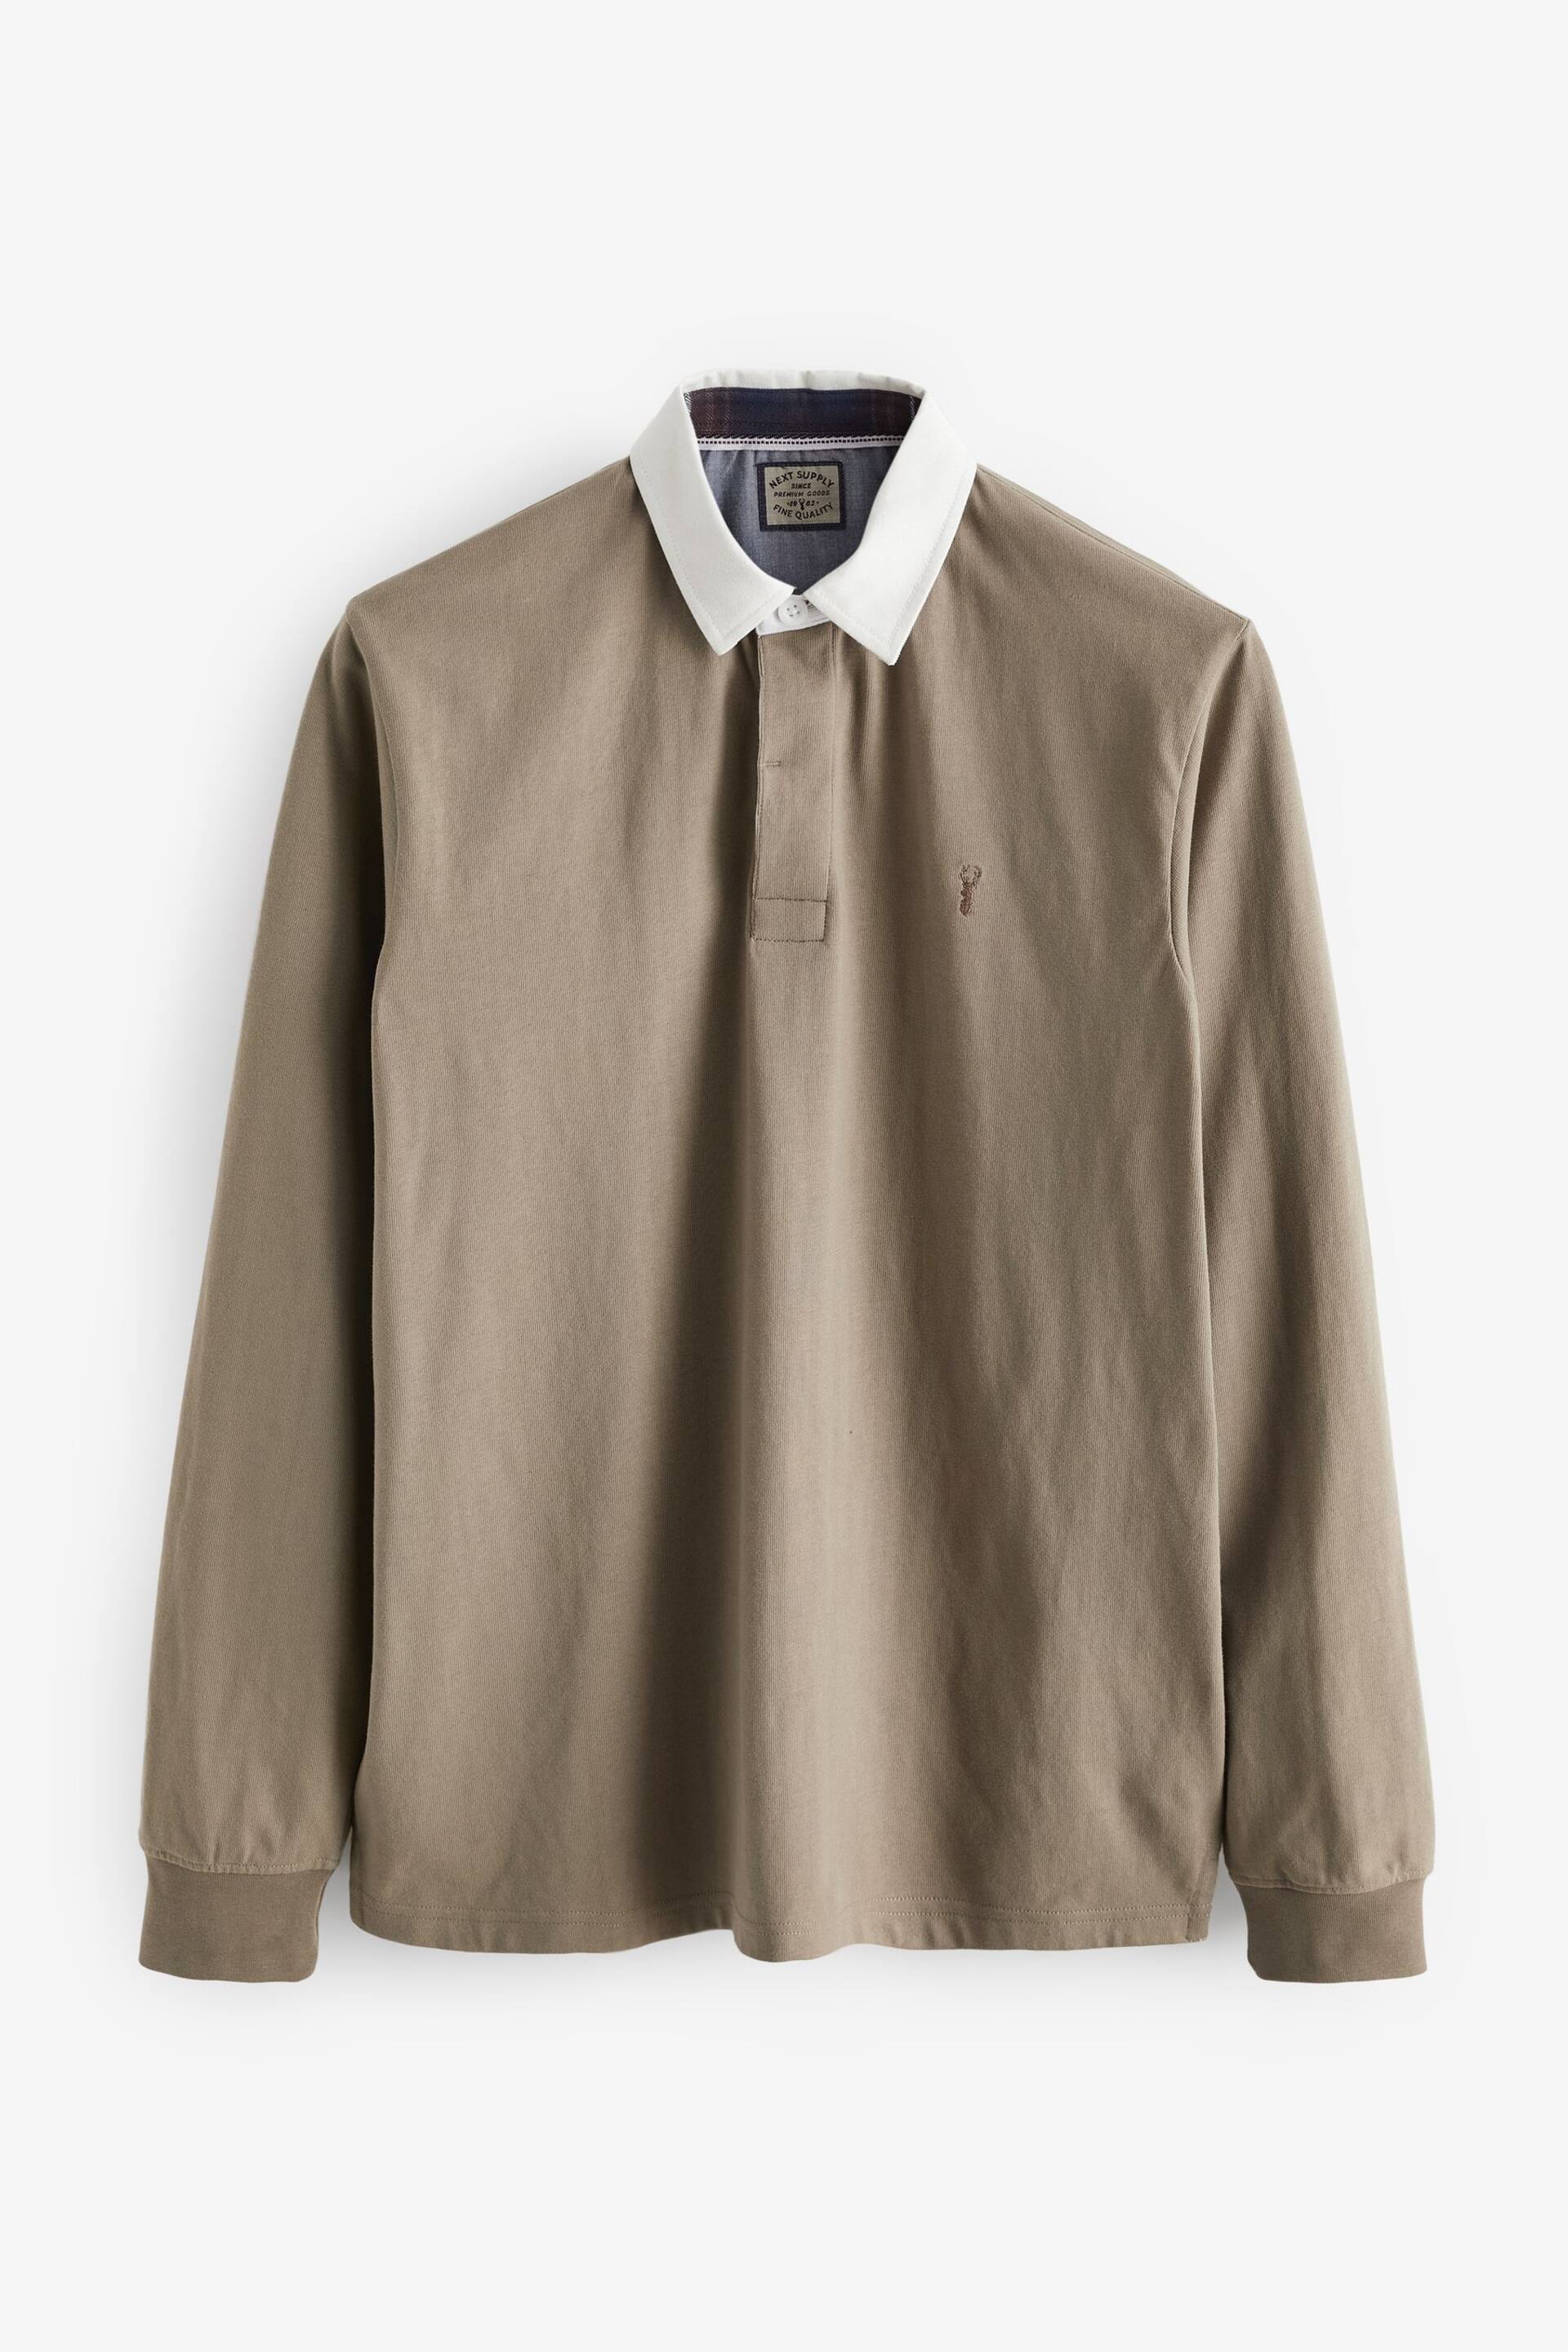 Neutral Brown Long Sleeve Rugby Shirt - Image 6 of 8